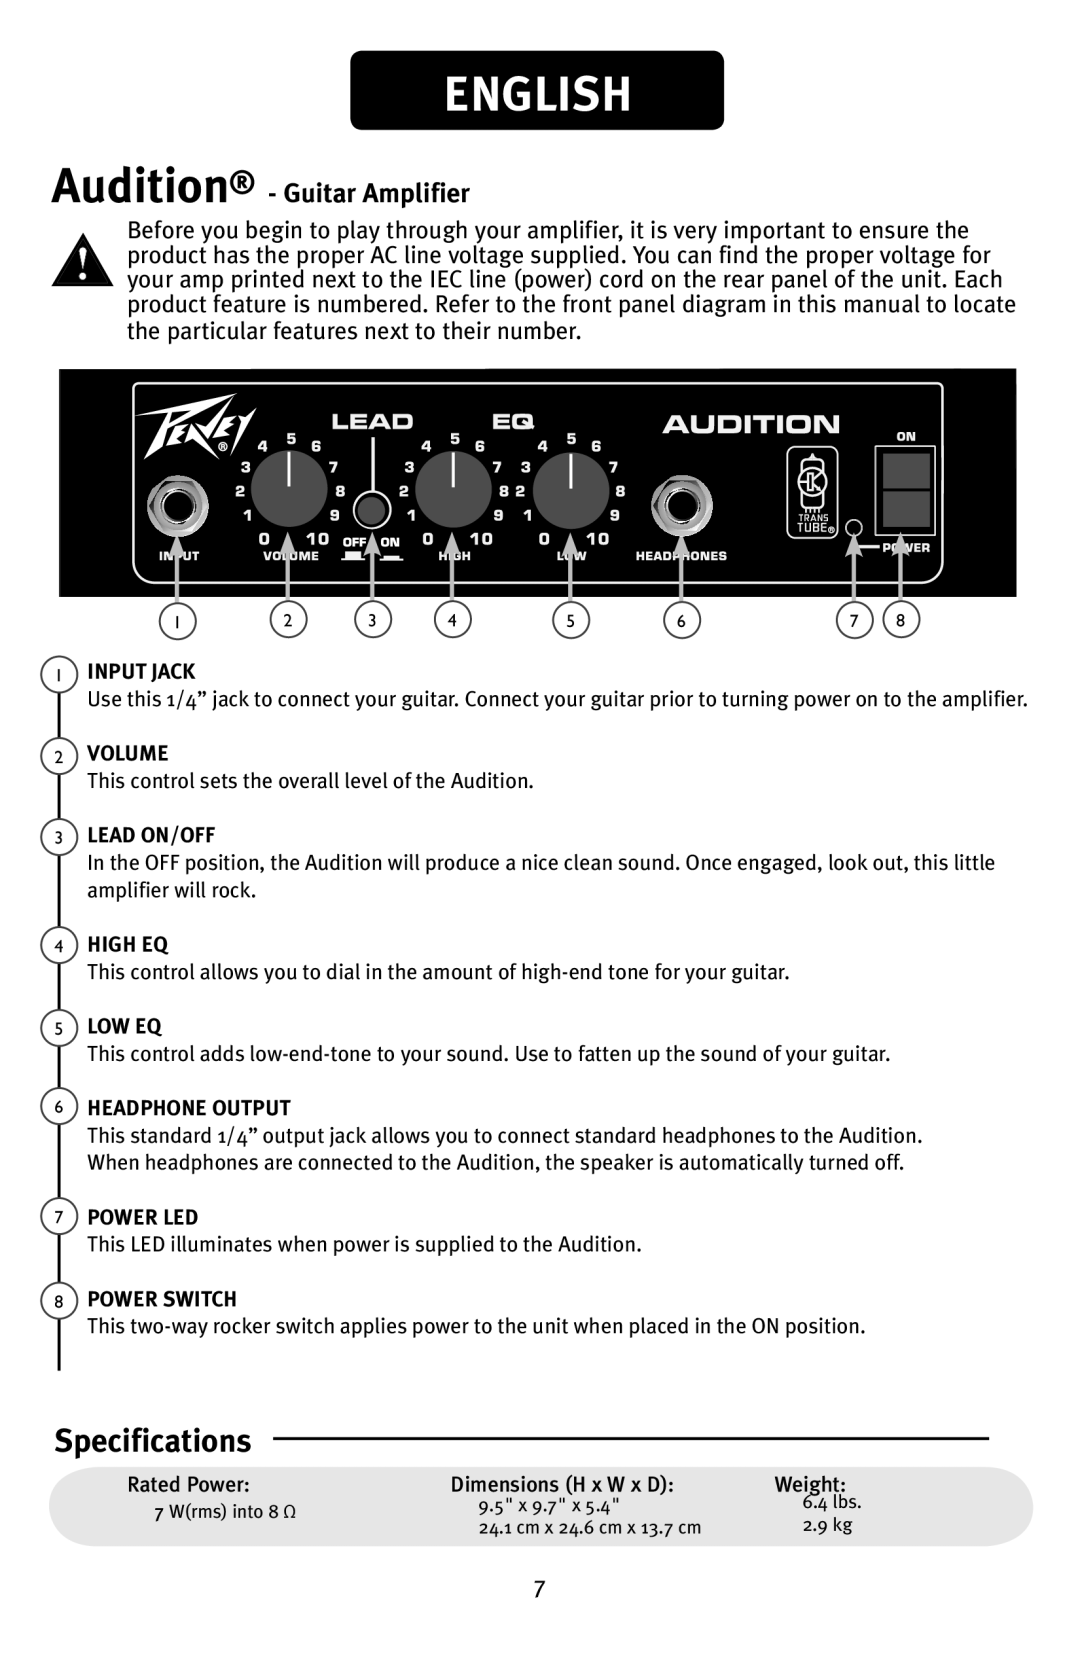 Peavey manual English, Specifications, Audition - Guitar Amplifier, 1INPUT JACK, Volume, Lead On/Off, 4HIGH EQ, 5LOW EQ 